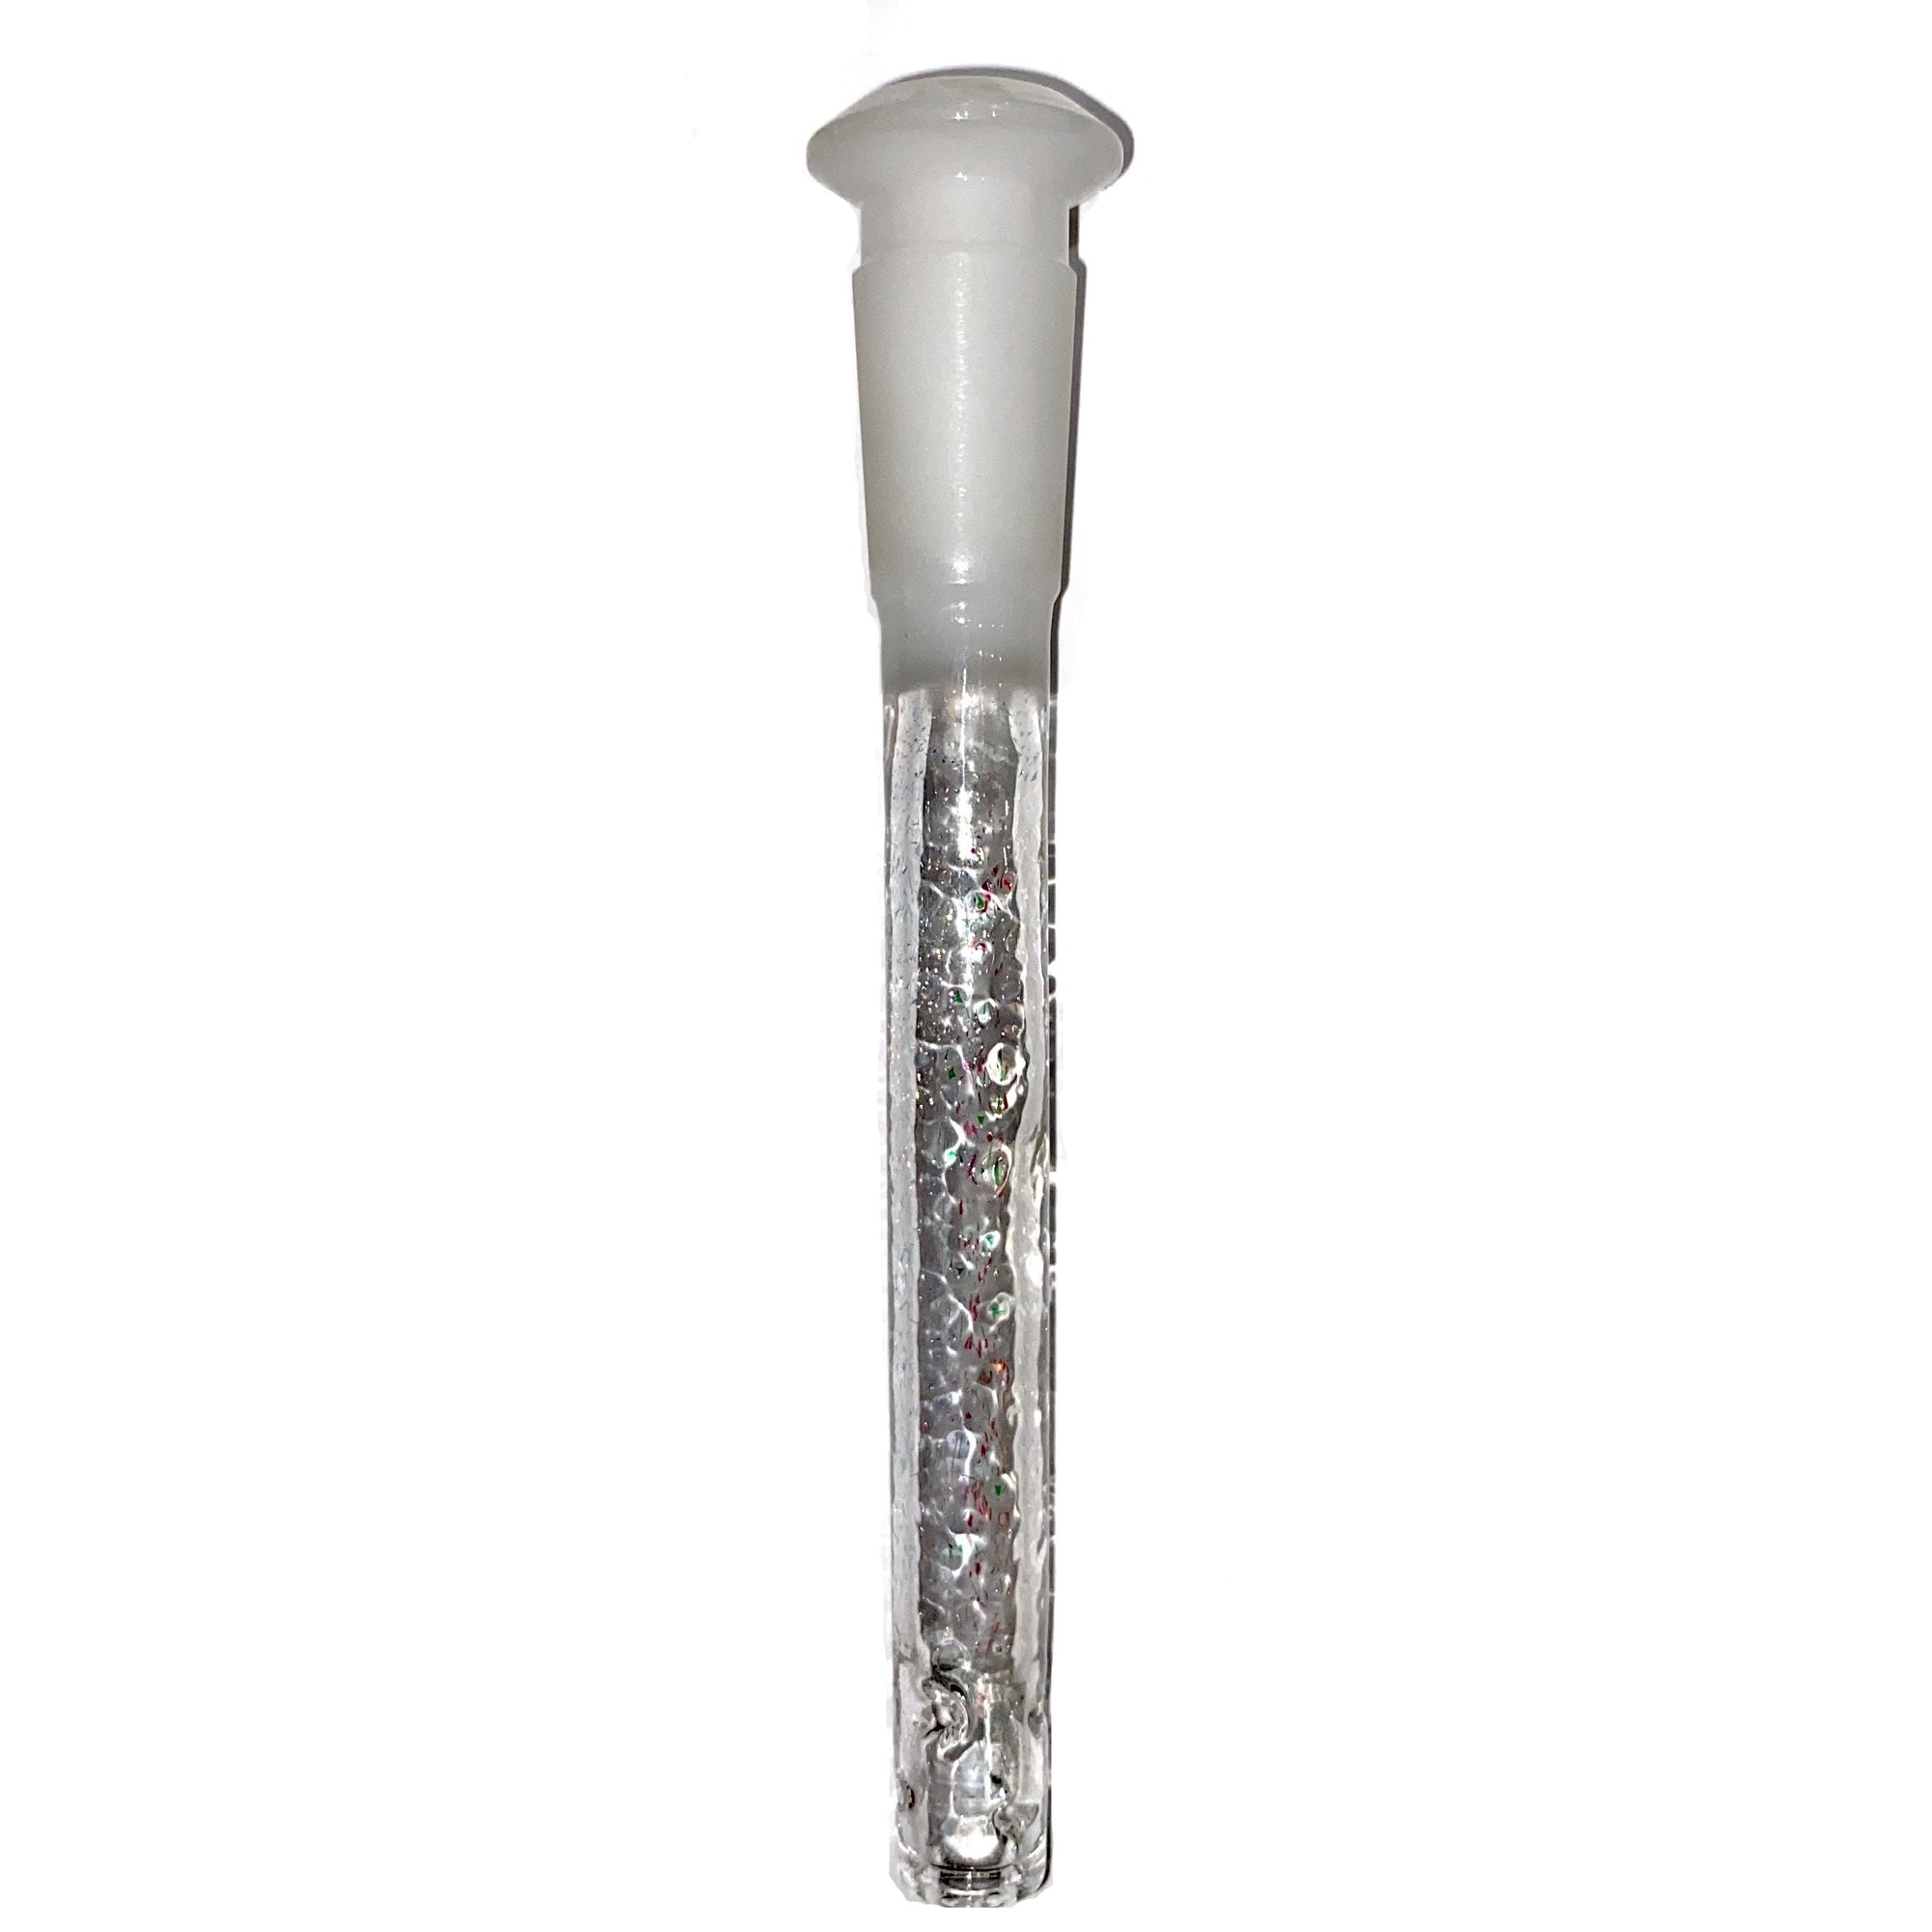 Dustorm Glass 18/14 Dichro Downstem (Clear) 5.5 Inch with White Joint show variants